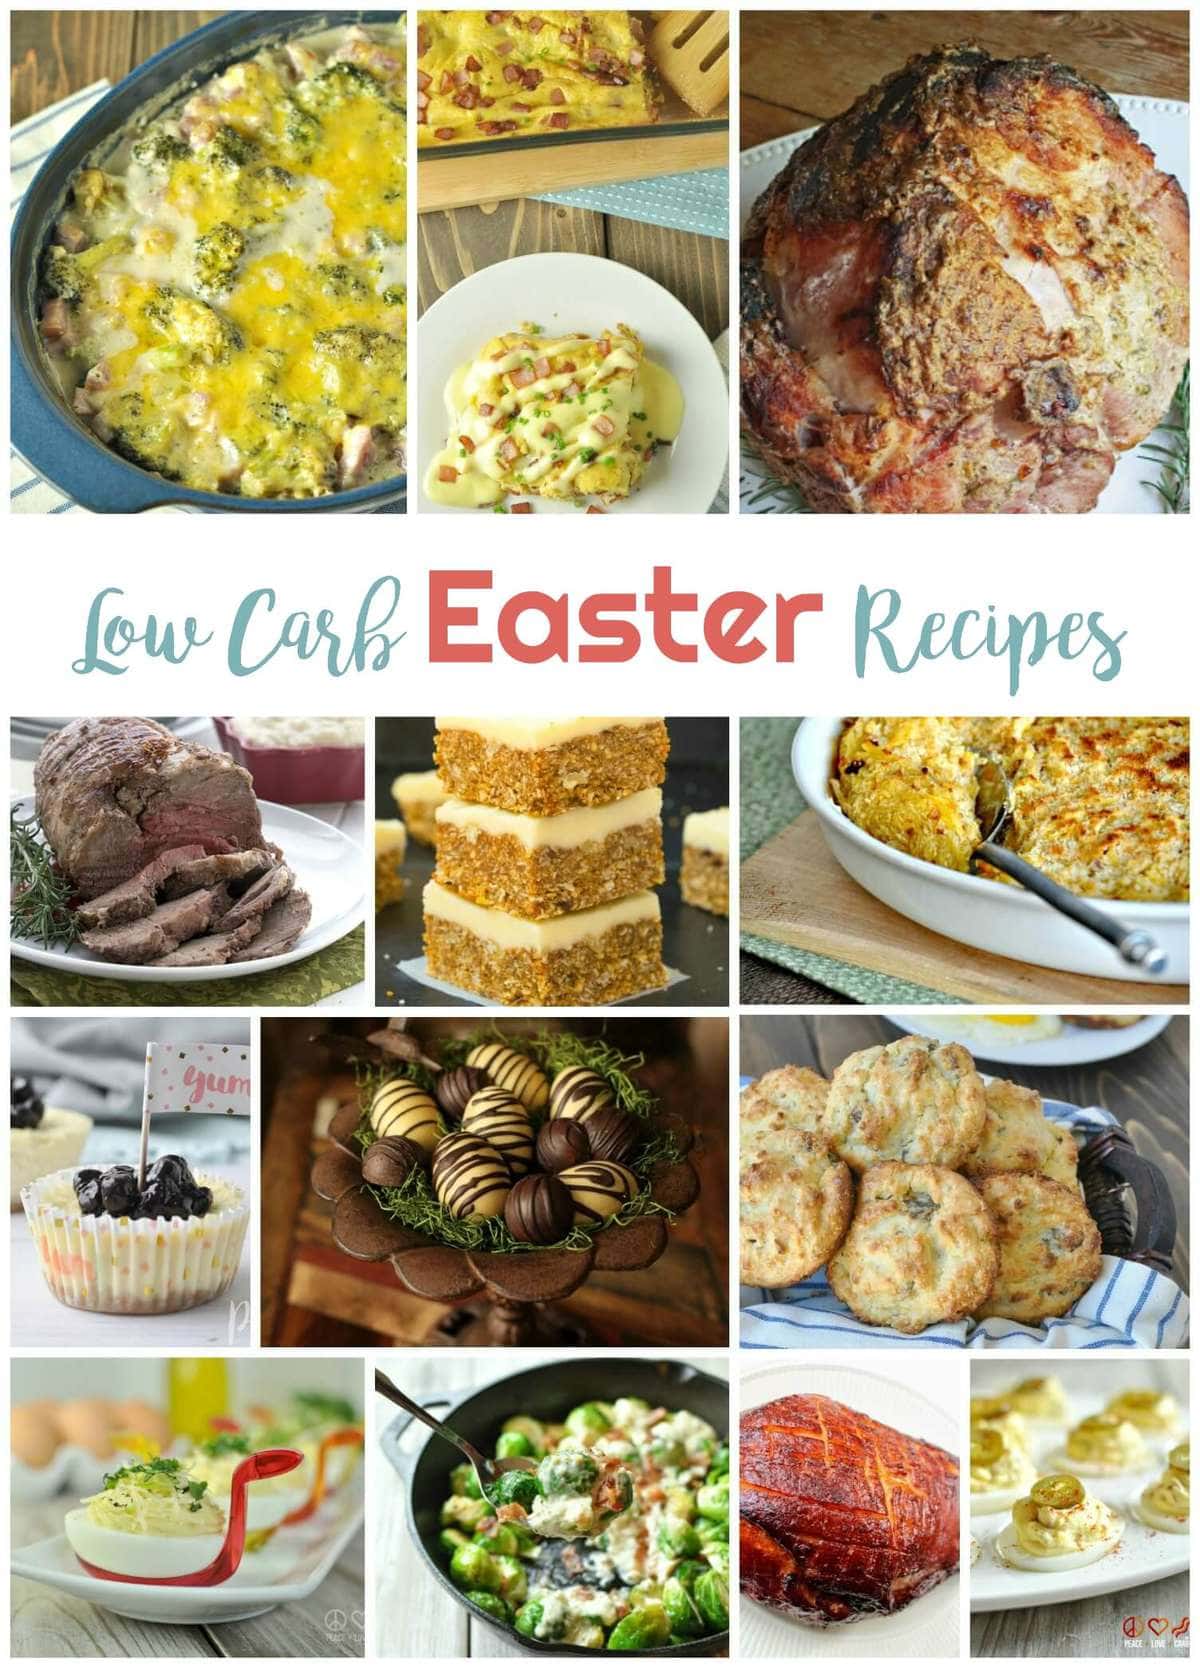 Low Carb Easter Recipes | Peace Love and Low Carb